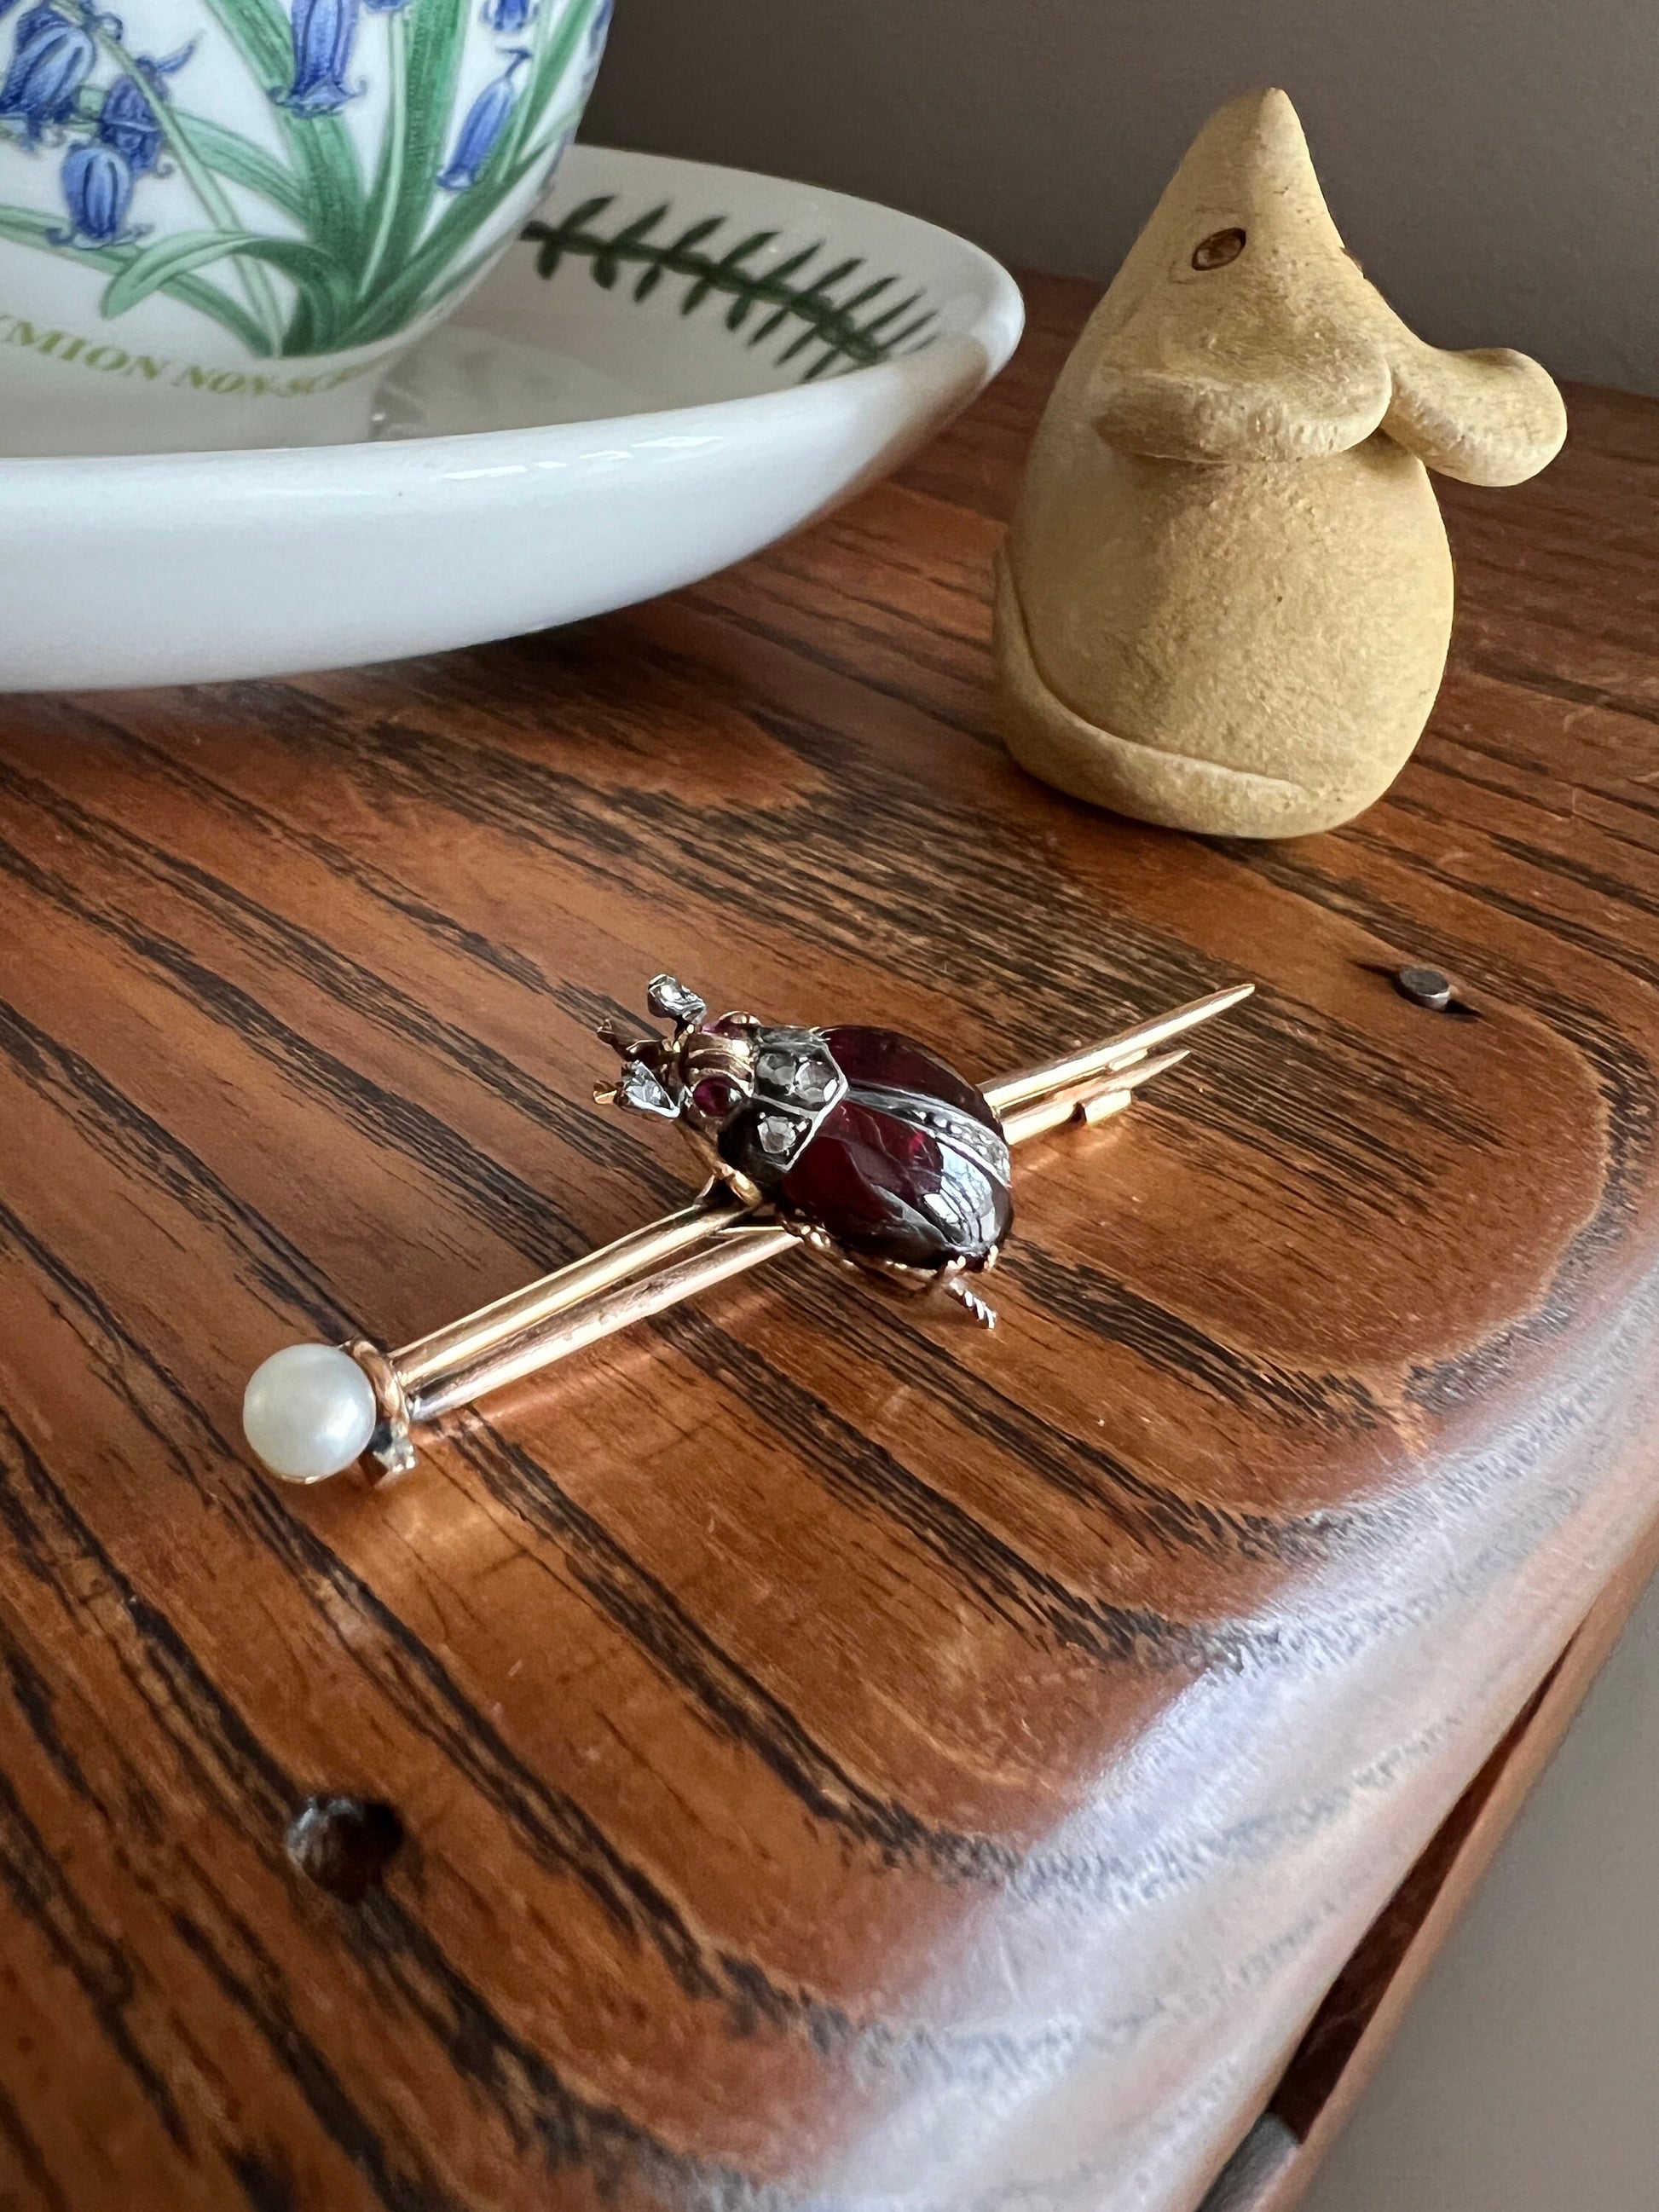 BUG Beetle GARNET Wing Rose Cut Diamond French Antique Victorian Figural Pin Brooch for Pendant 18k Gold Gift Red Carbuncle Scarab Connector